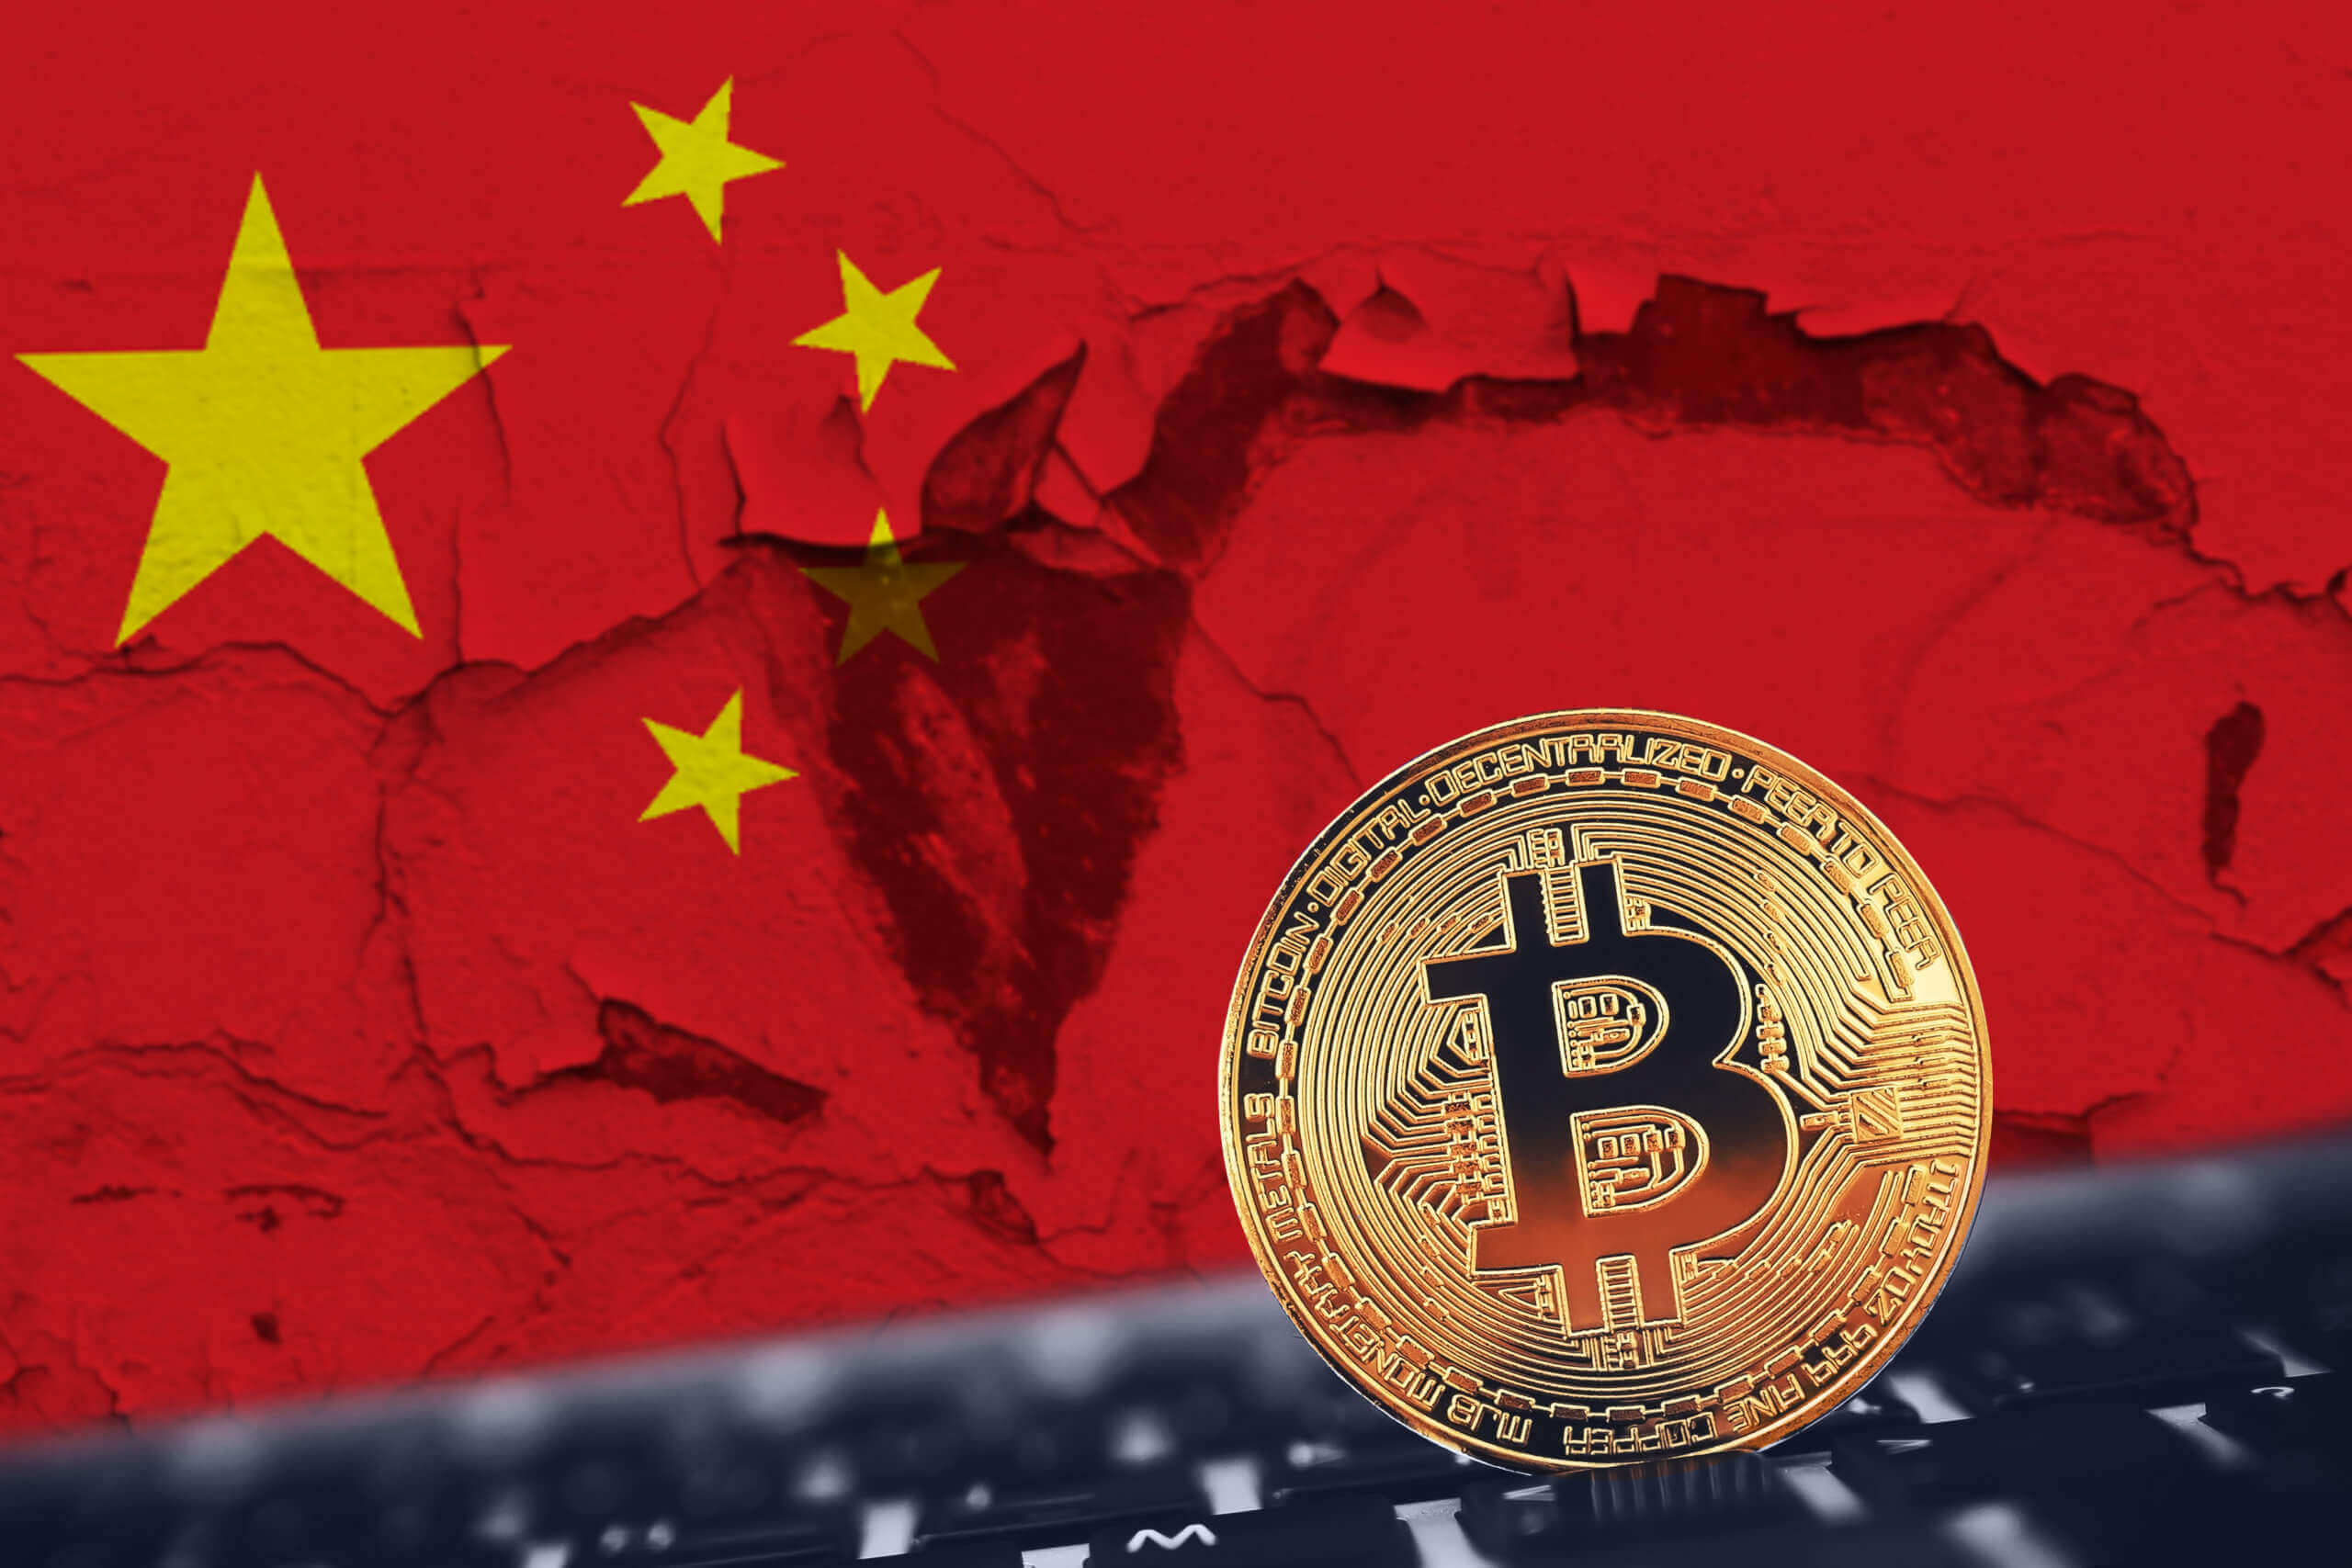 Why did China crack down on crypto?